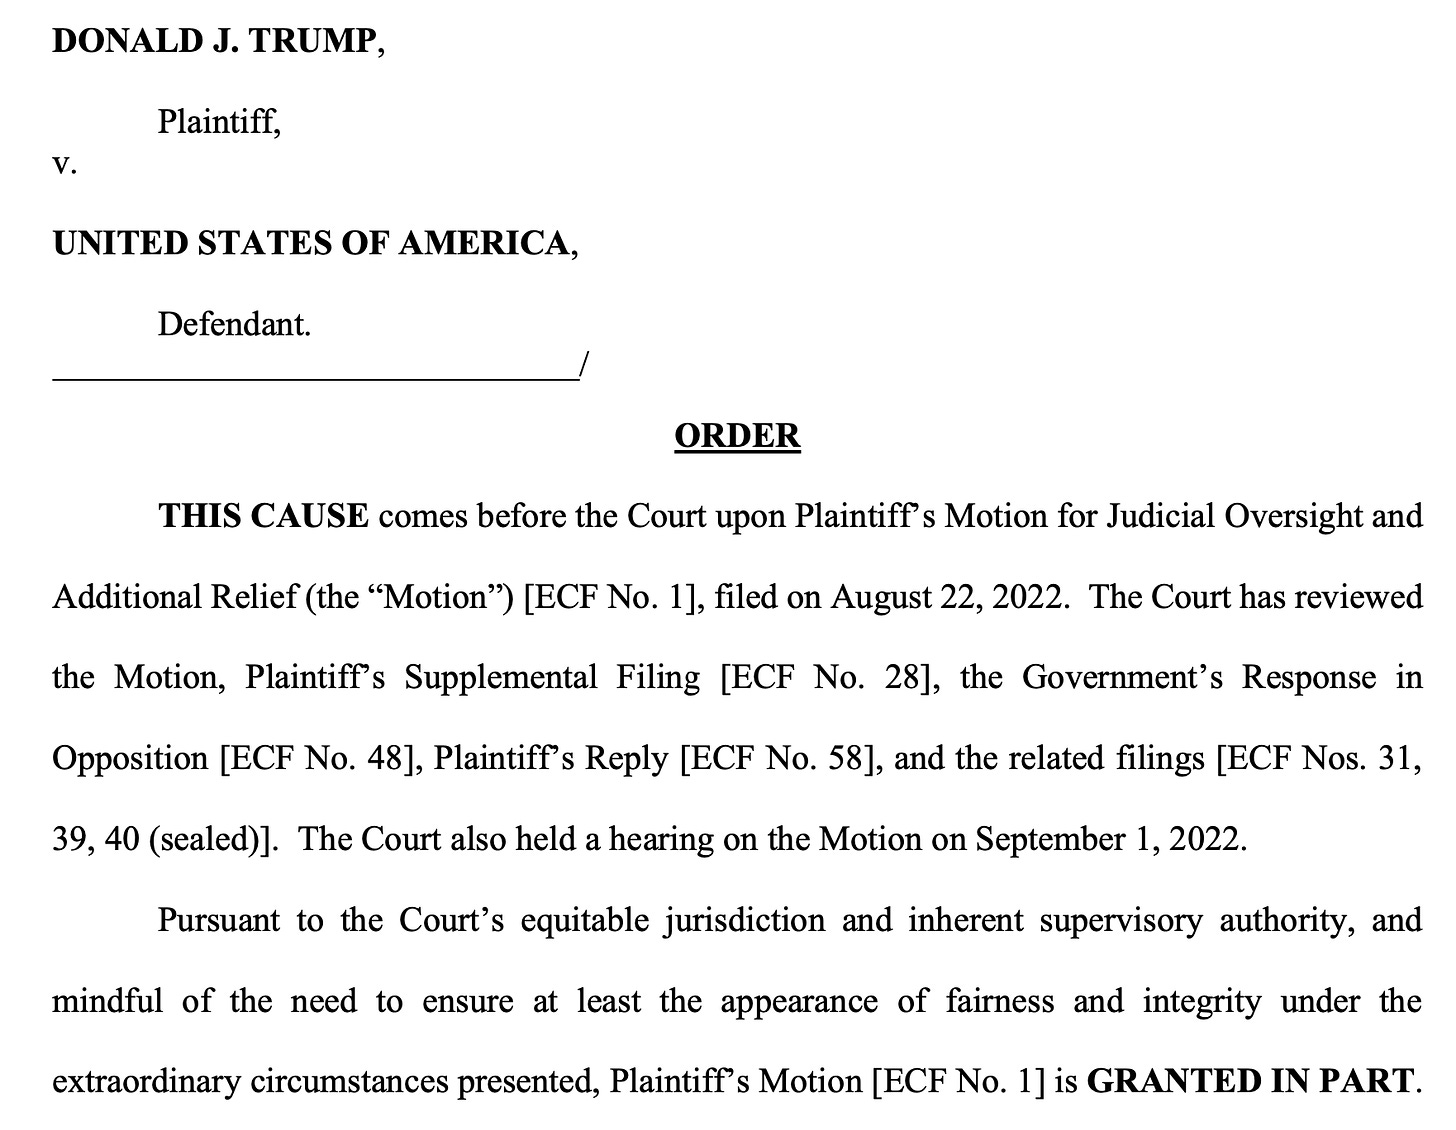 DONALD J. TRUMP, Plaintiff, v. UNITED STATES OF AMERICA, Defendant. // ORDER // THIS CAUSE comes before the Court upon Plaintiff’s Motion for Judicial Oversight and Additional Relief (the “Motion”) [ECF No. 1], filed on August 22, 2022. The Court has reviewed the Motion, Plaintiff’s Supplemental Filing [ECF No. 28], the Government’s Response in Opposition [ECF No. 48], Plaintiff’s Reply [ECF No. 58], and the related filings [ECF Nos. 31, 39, 40 (sealed)]. The Court also held a hearing on the Motion on September 1, 2022. Pursuant to the Court’s equitable jurisdiction and inherent supervisory authority, and mindful of the need to ensure at least the appearance of fairness and integrity under the extraordinary circumstances presented, Plaintiff’s Motion [ECF No. 1] is GRANTED IN PART.